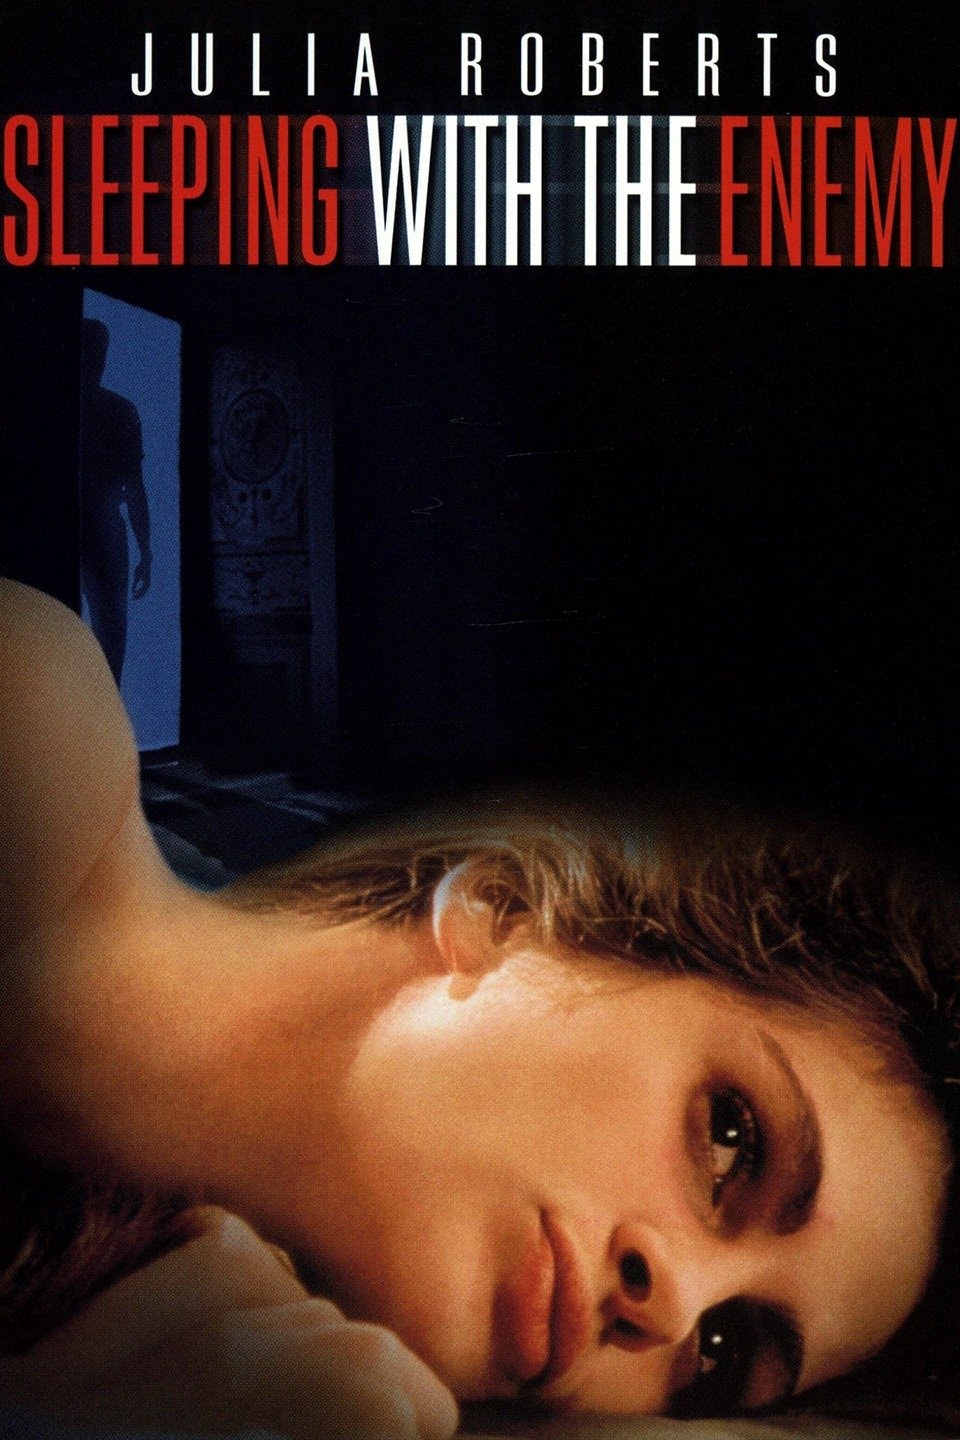 This is a picture of the cover of the movie Sleeping with the Enemy starring Julia Roberts.